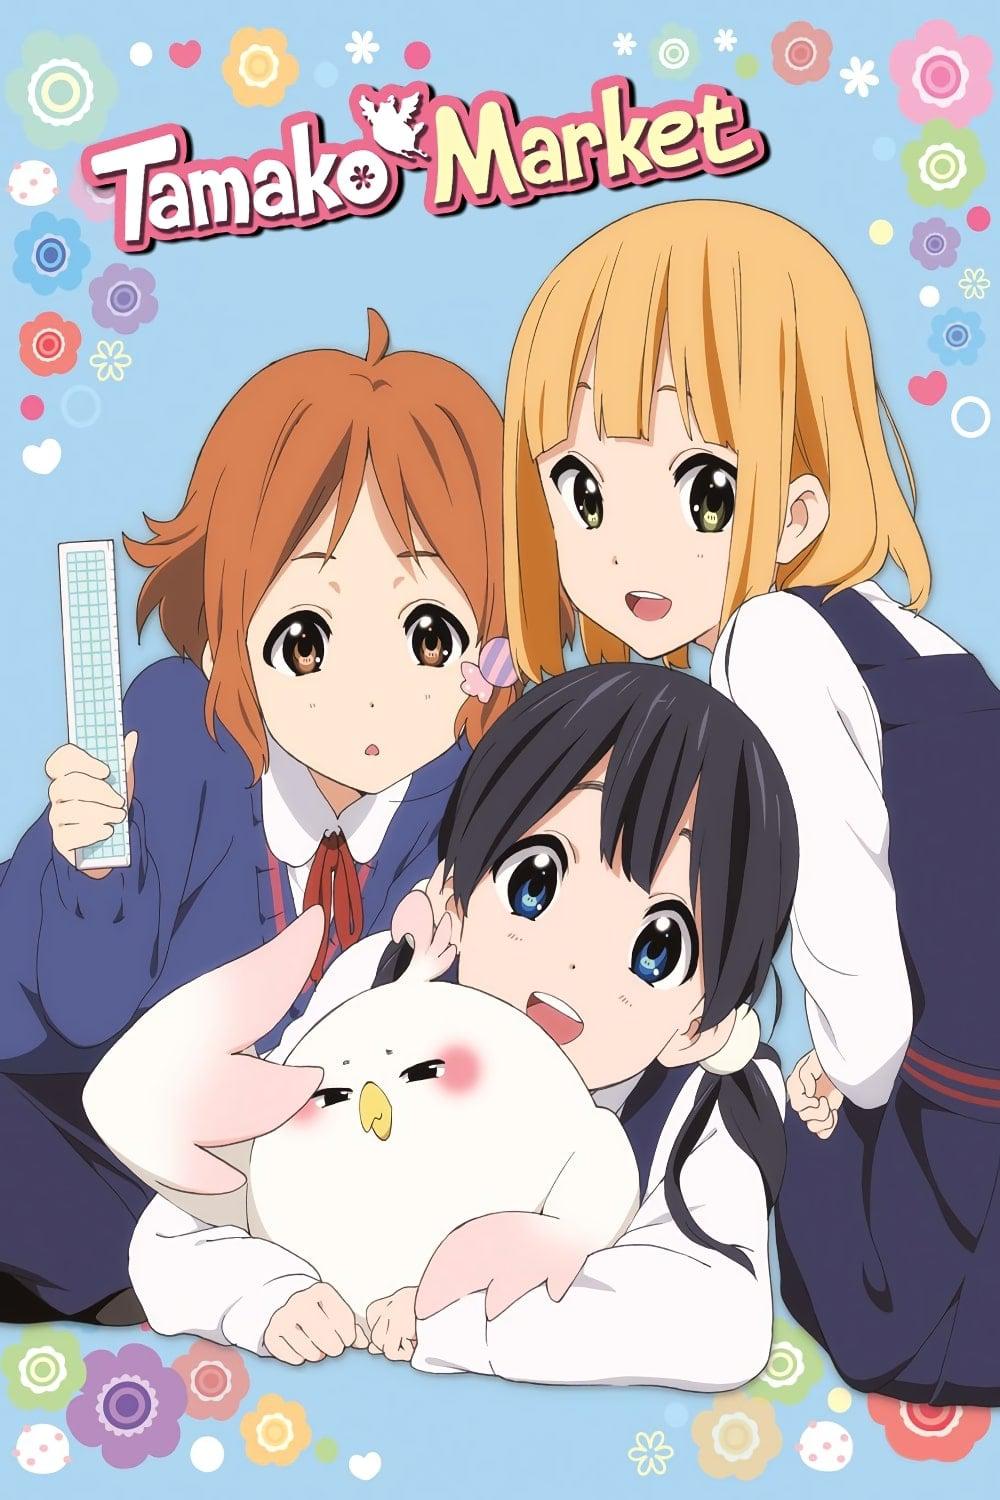 TV ratings for Tamako Market (たまこまーけっと) in Japan. Pony Canyon TV series